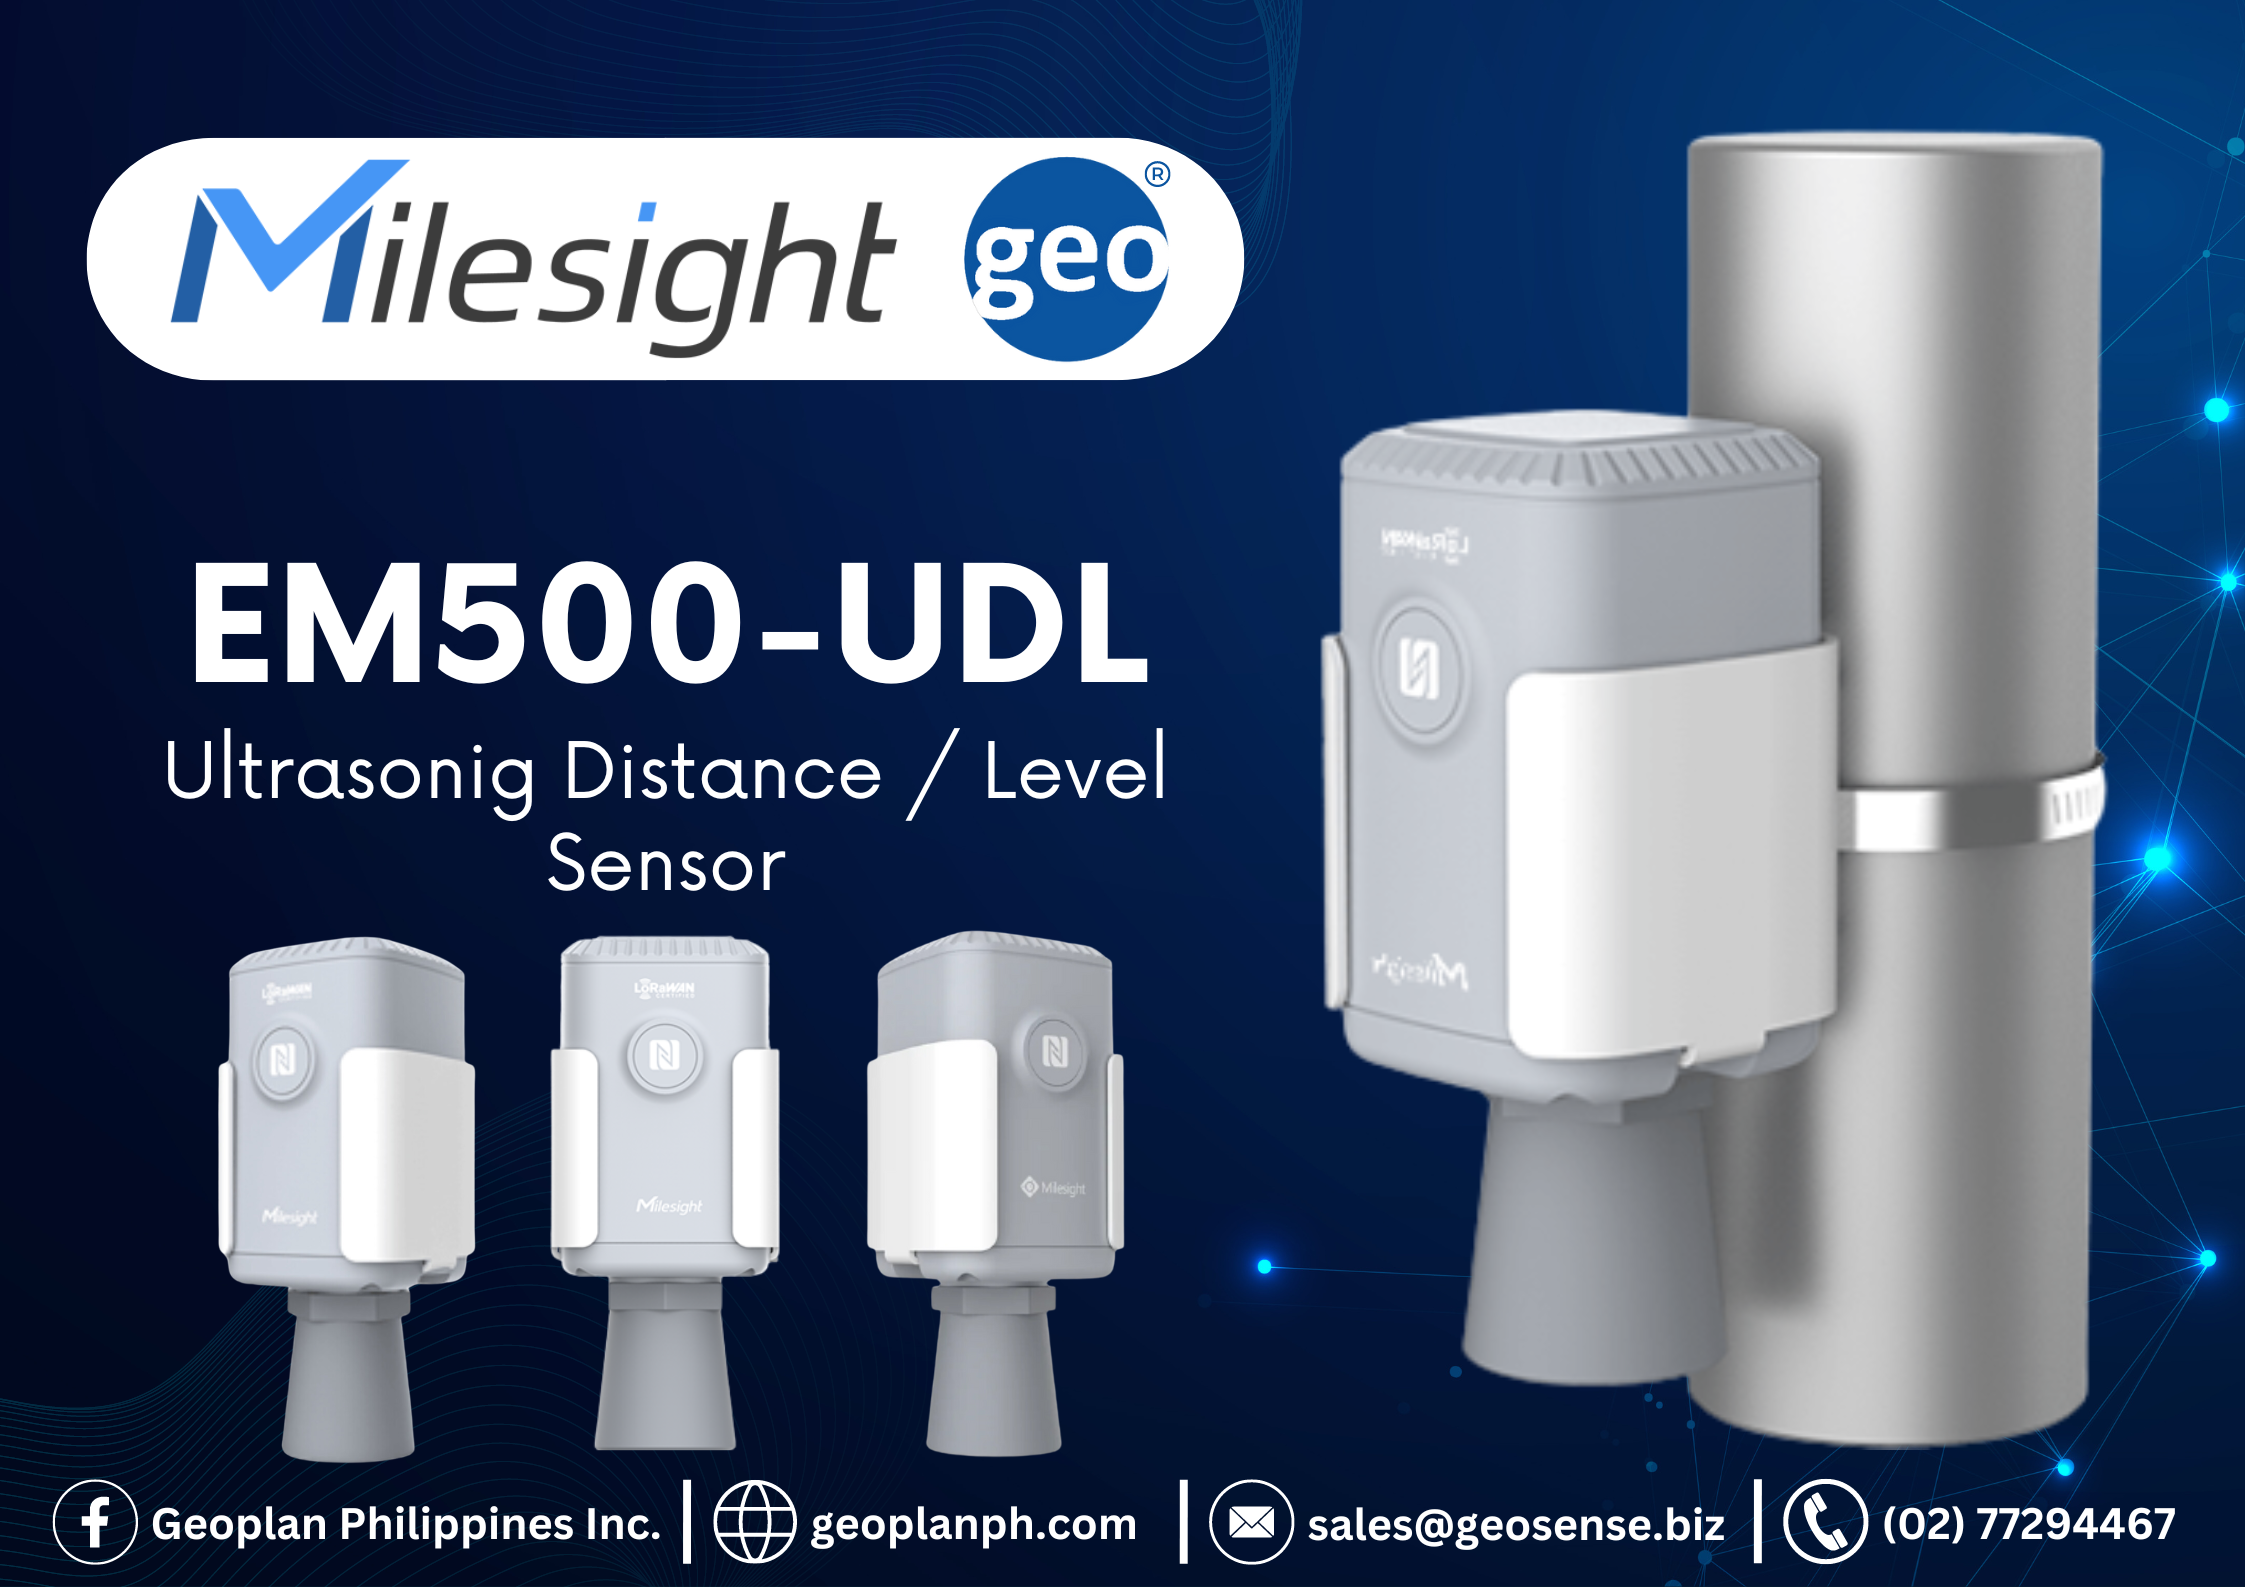 Milesight: The EM500-UDL Sensor Uses Ultrasonic Technology To Measure Distance And Level For Convenience